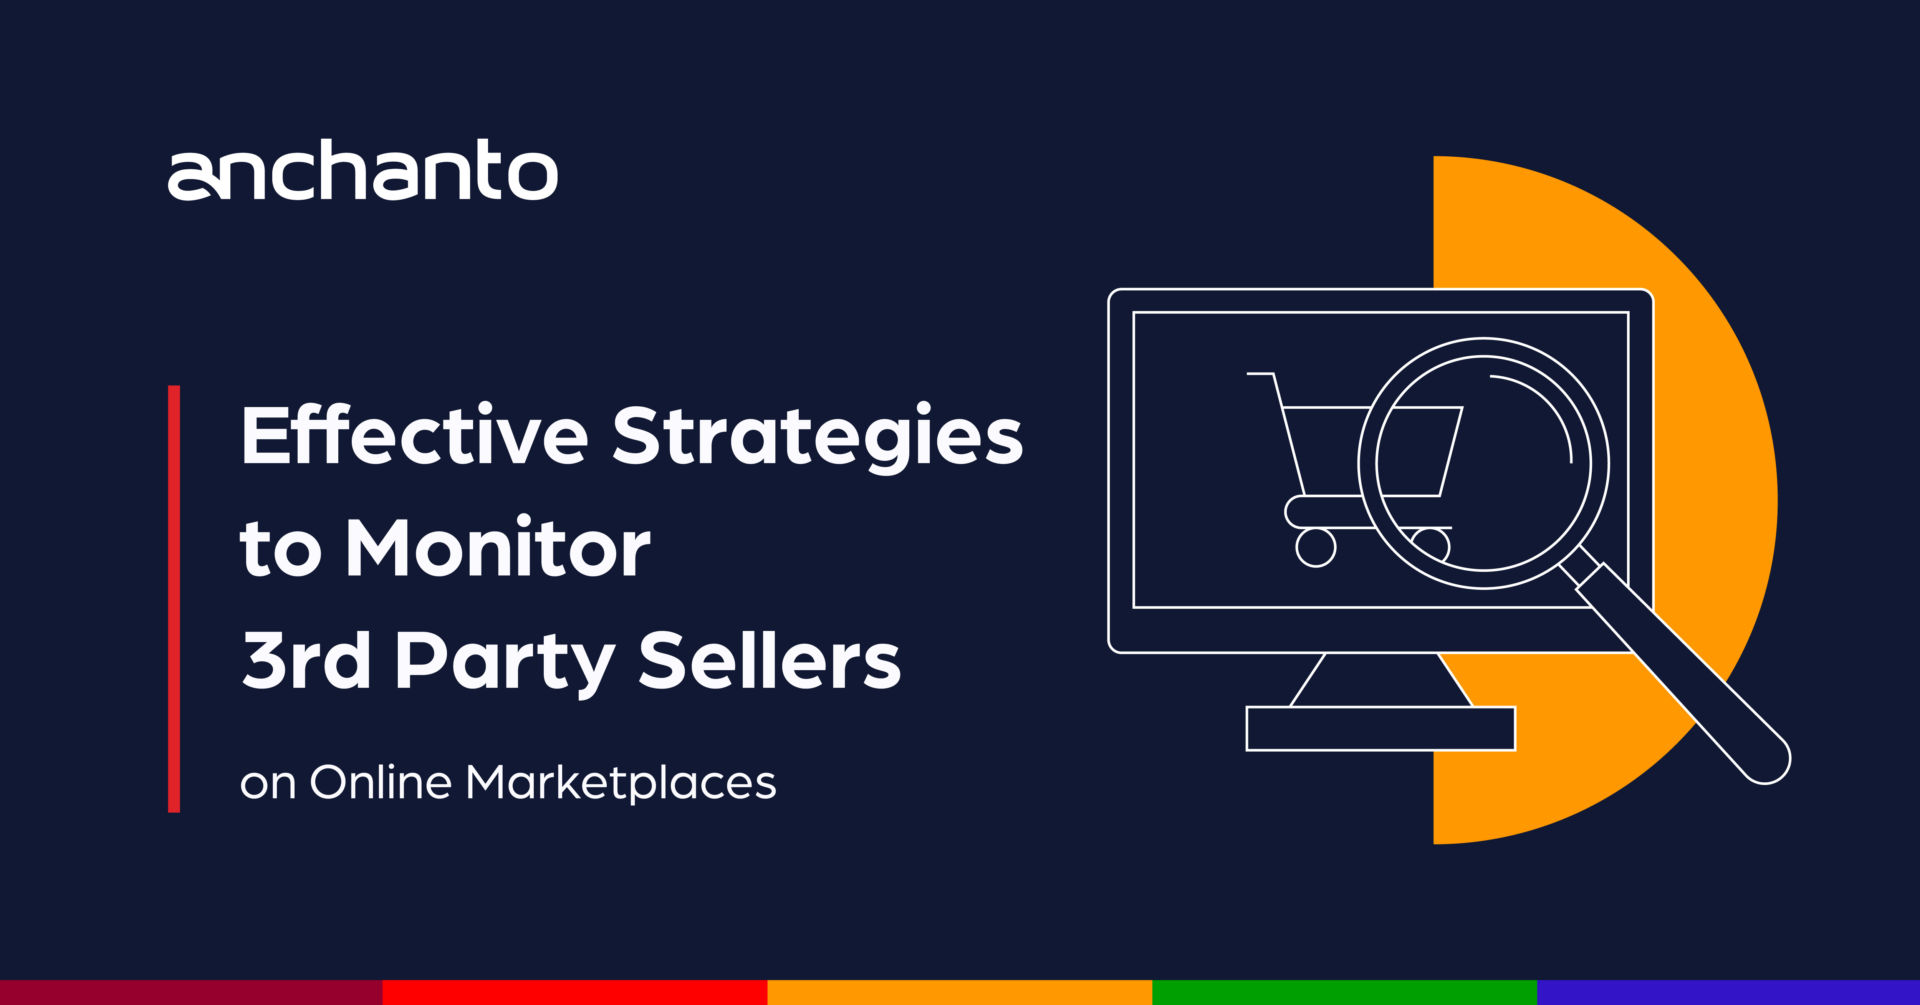 Effective Strategies for Monitoring 3rd Party Sellers on Online Marketplaces